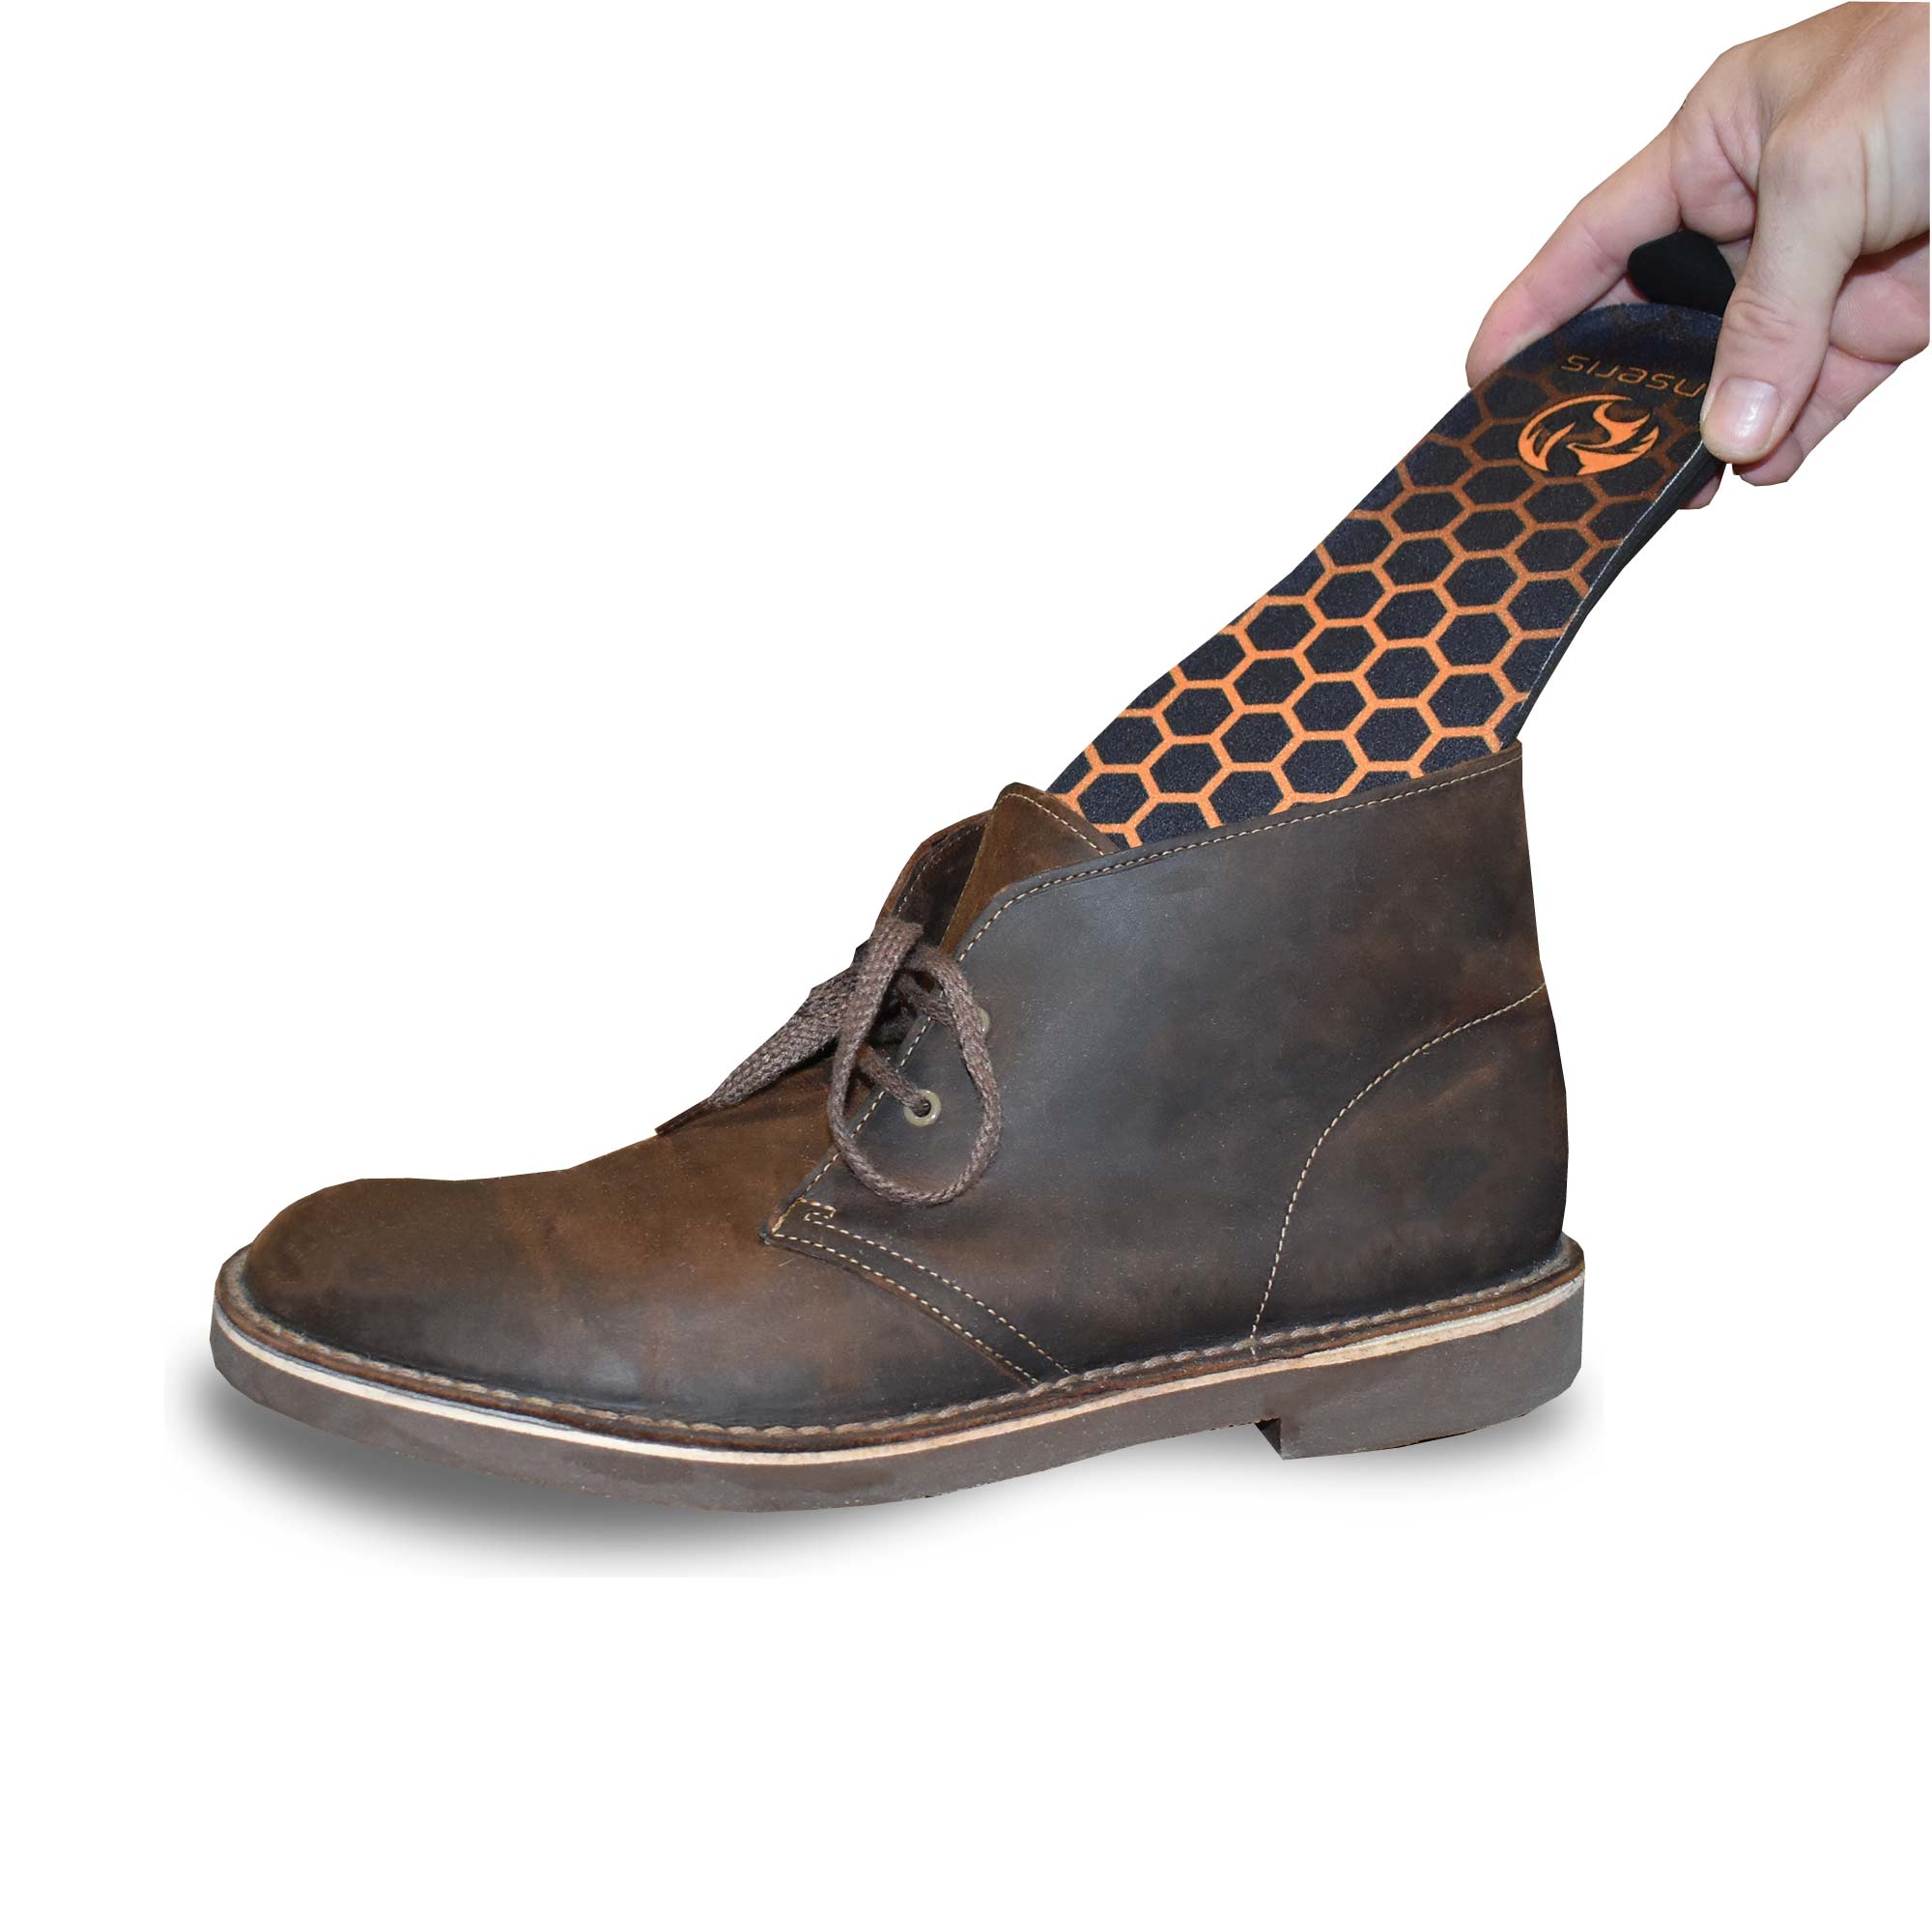 our heated insoles feature an easy trim to fit insole that makes them easy to fit in any of your shoes or boots.  use in your everyday shoes or for other activites like hunting, fishing, snowboarding, skiing or running.